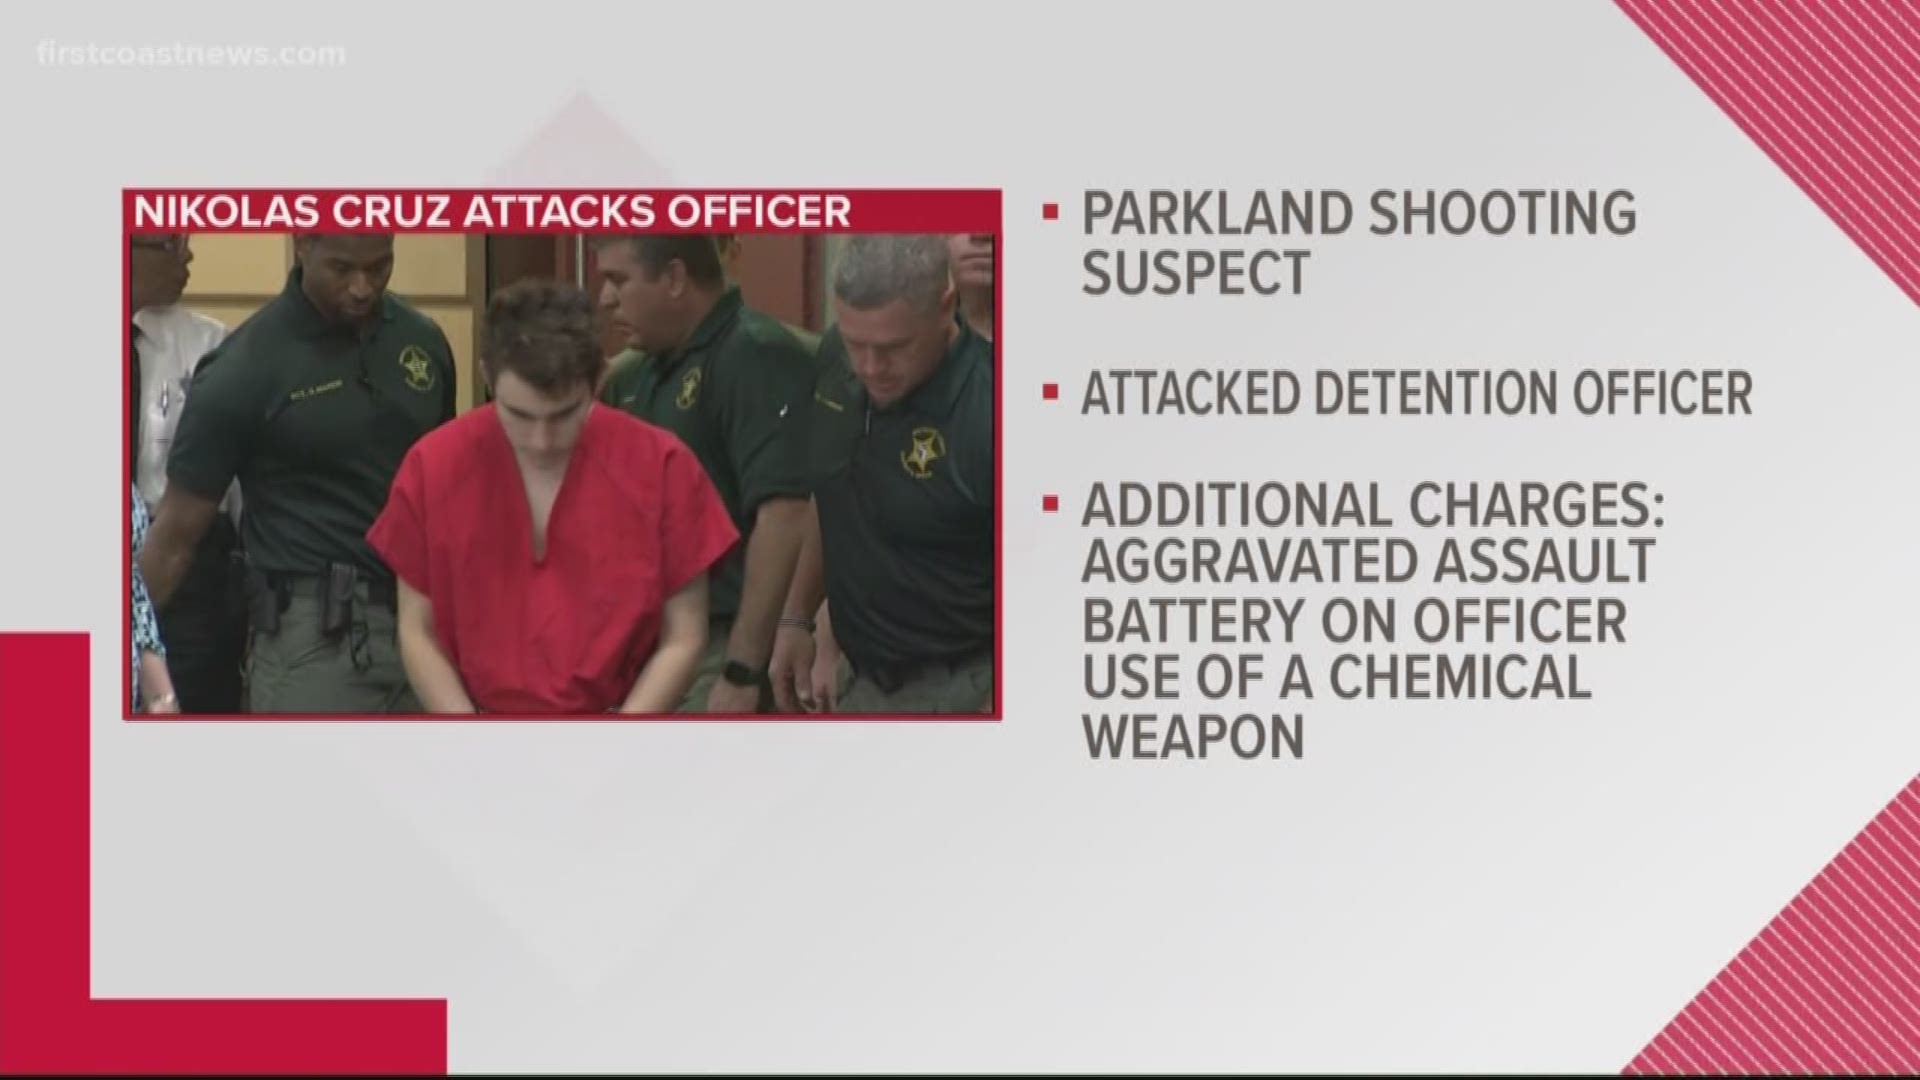 Parkland school shooting suspect Nikolas Cruz was involved in an incident inside the Broward County Jail, where he is awaiting trial for allegedly killing 17 people this past February.